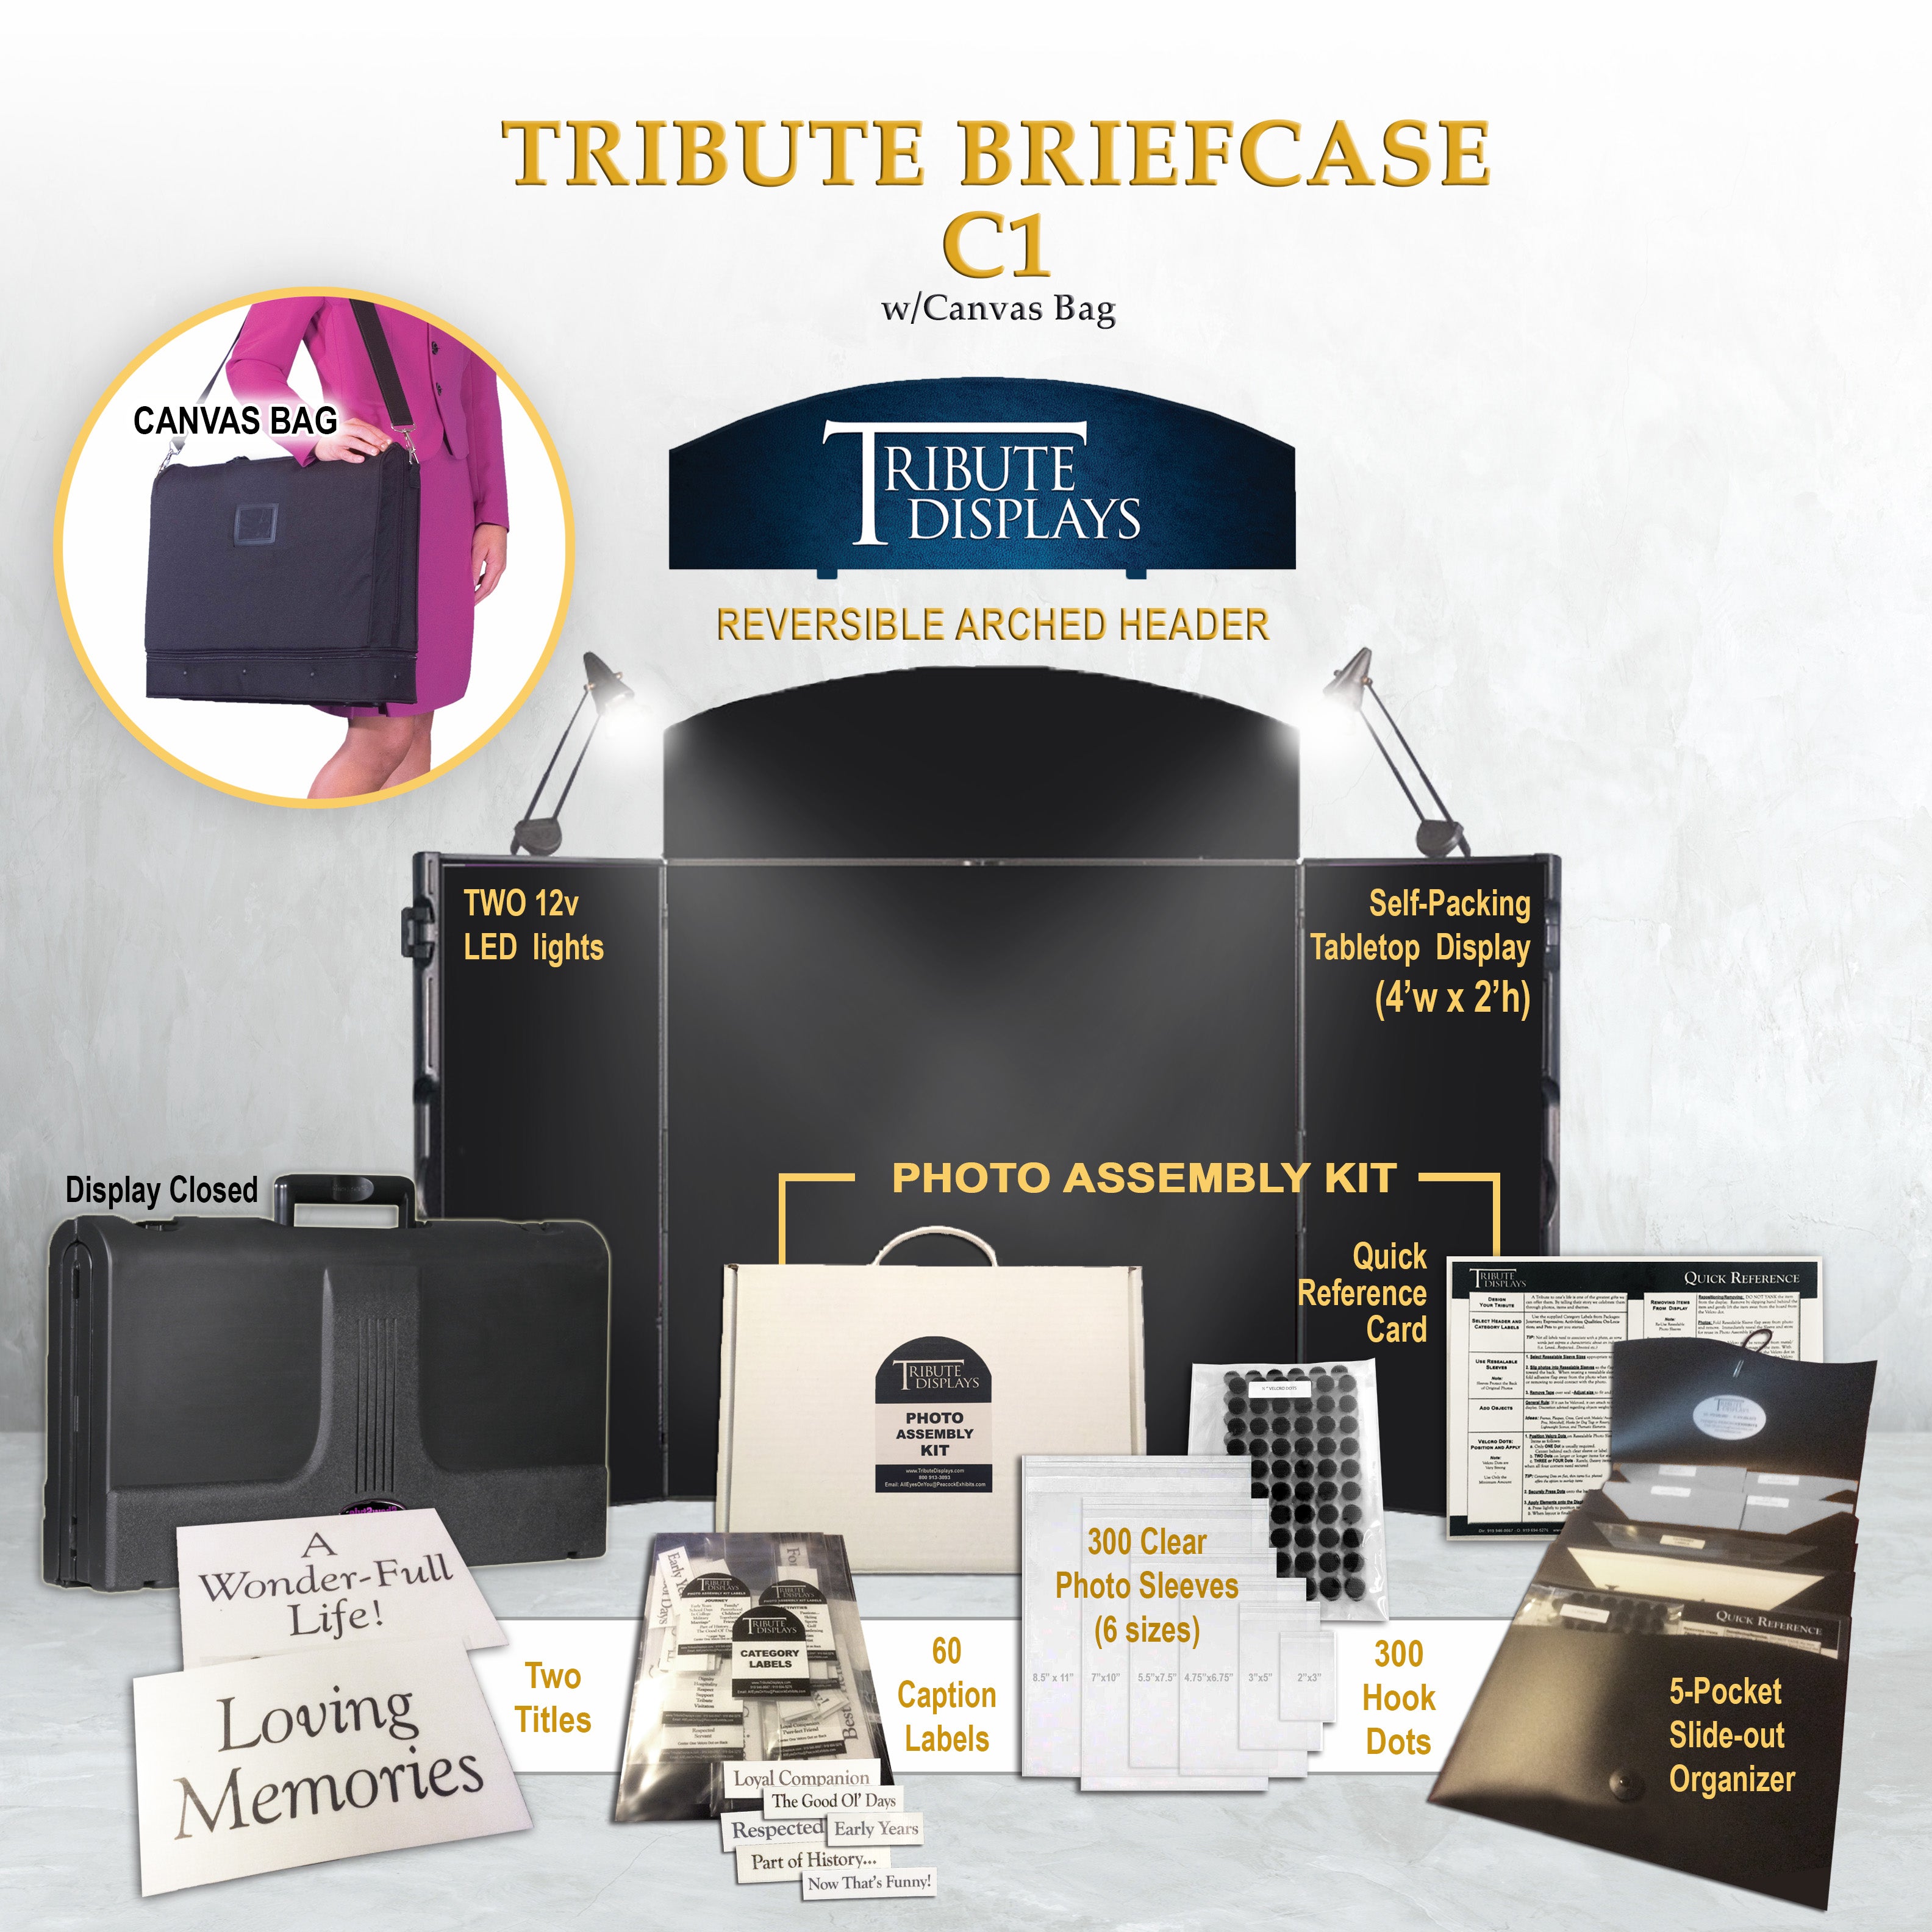 System Bundle "ABC": Tribute 3-Tier (Max + Deluxe + Briefcase)